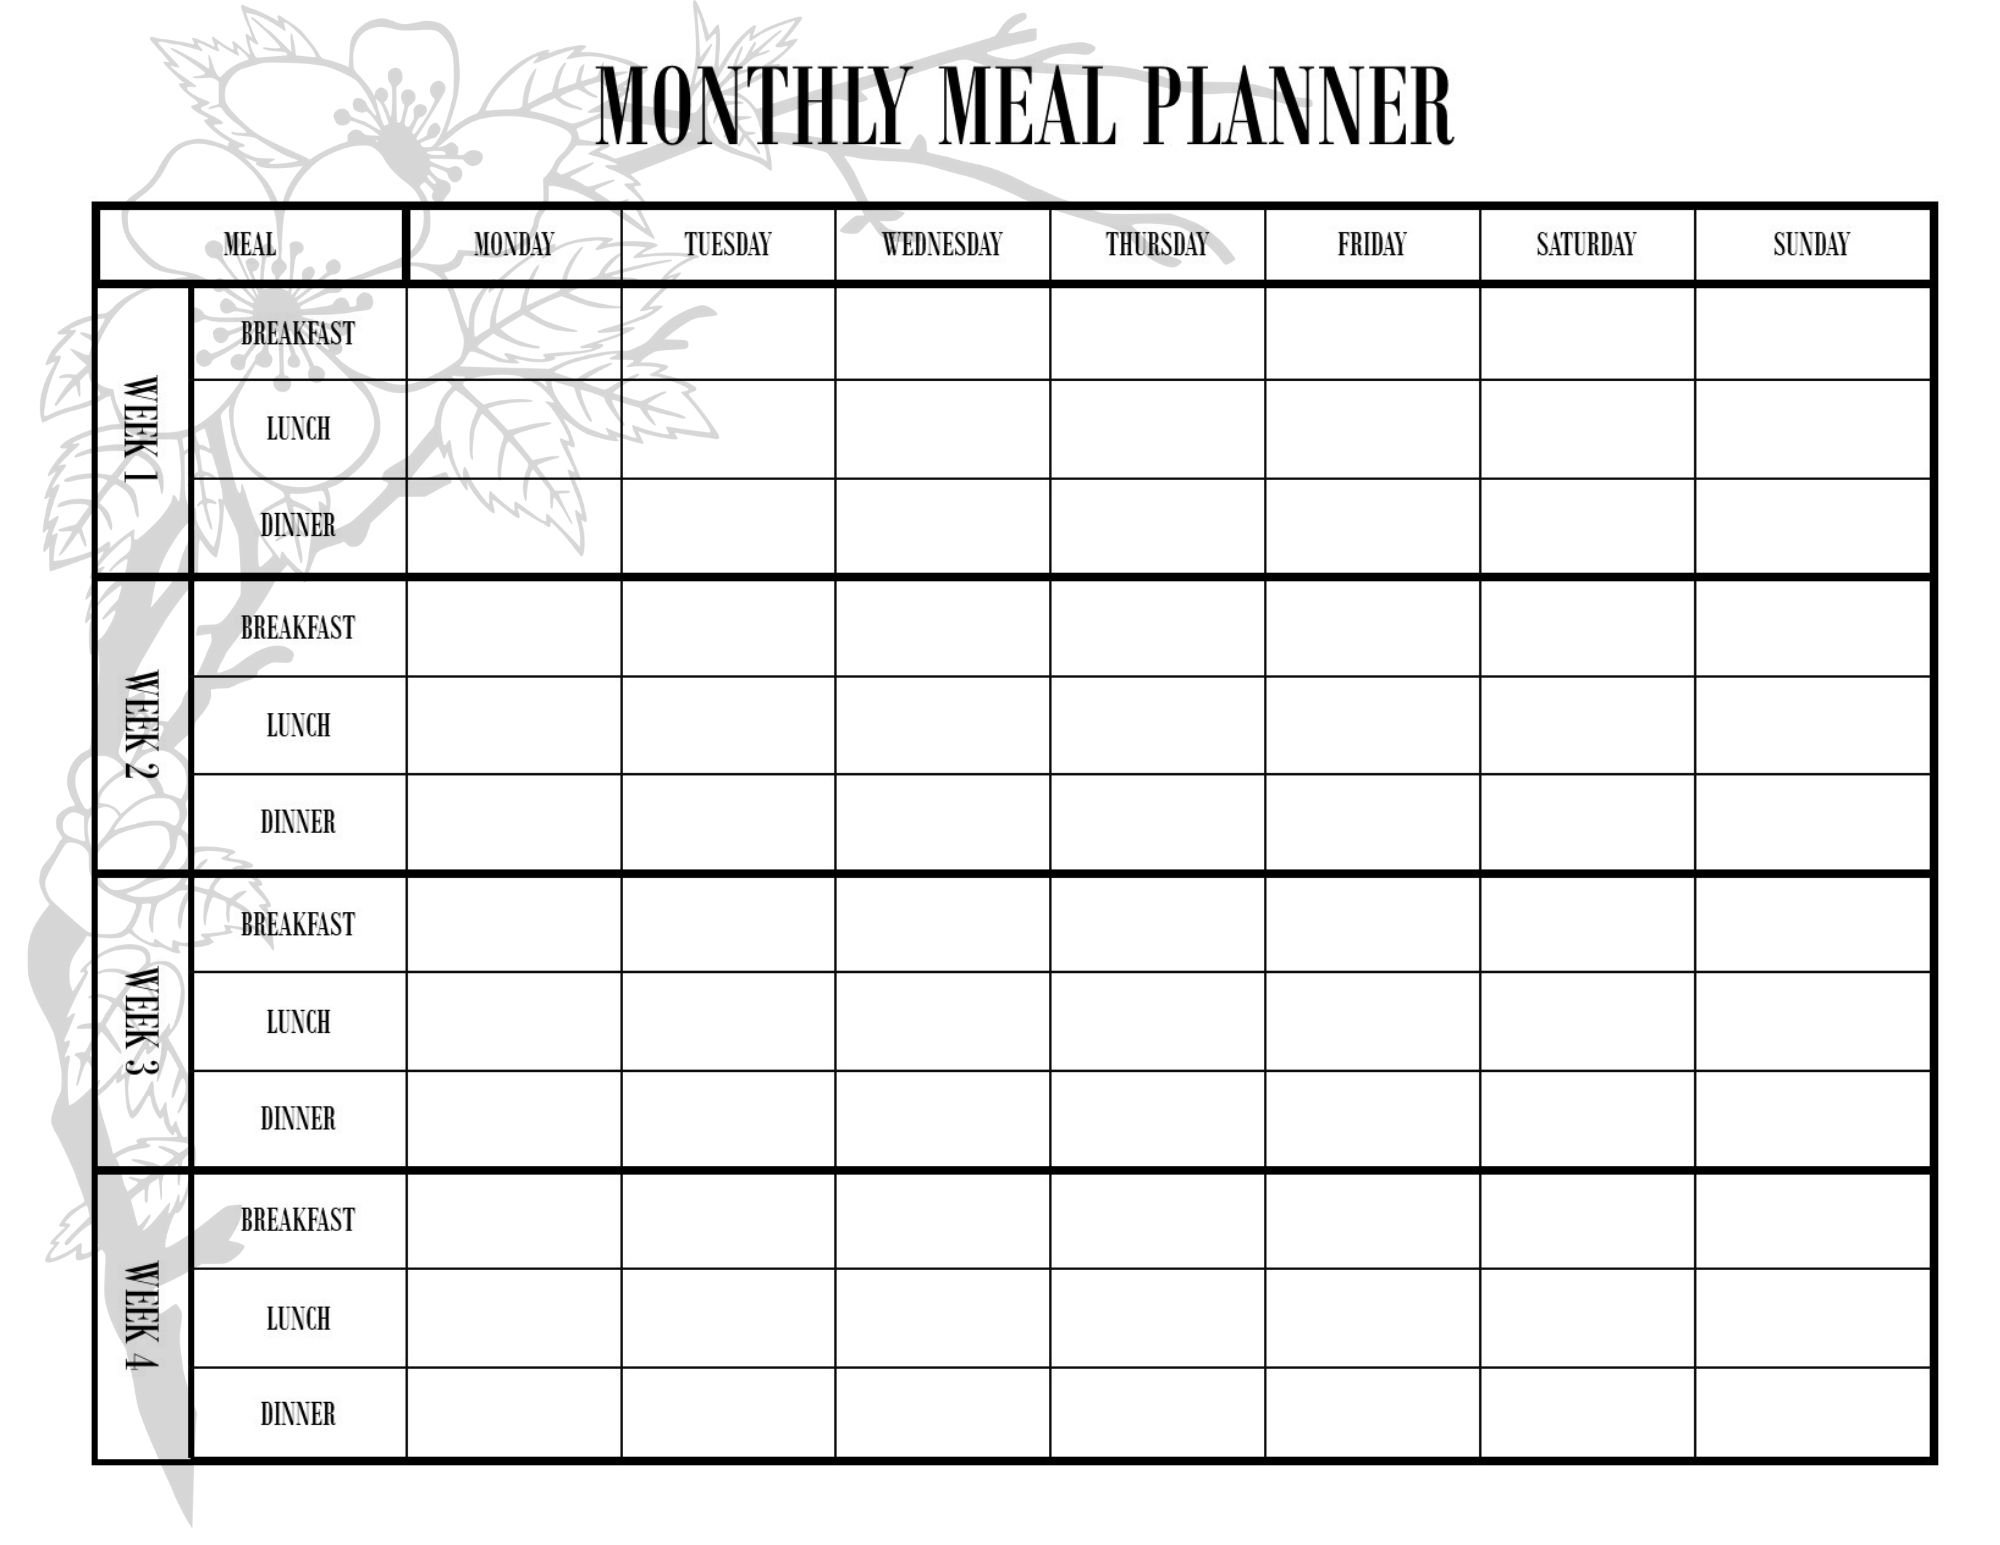 Monthly Meal Planner Printable Download - Etsy